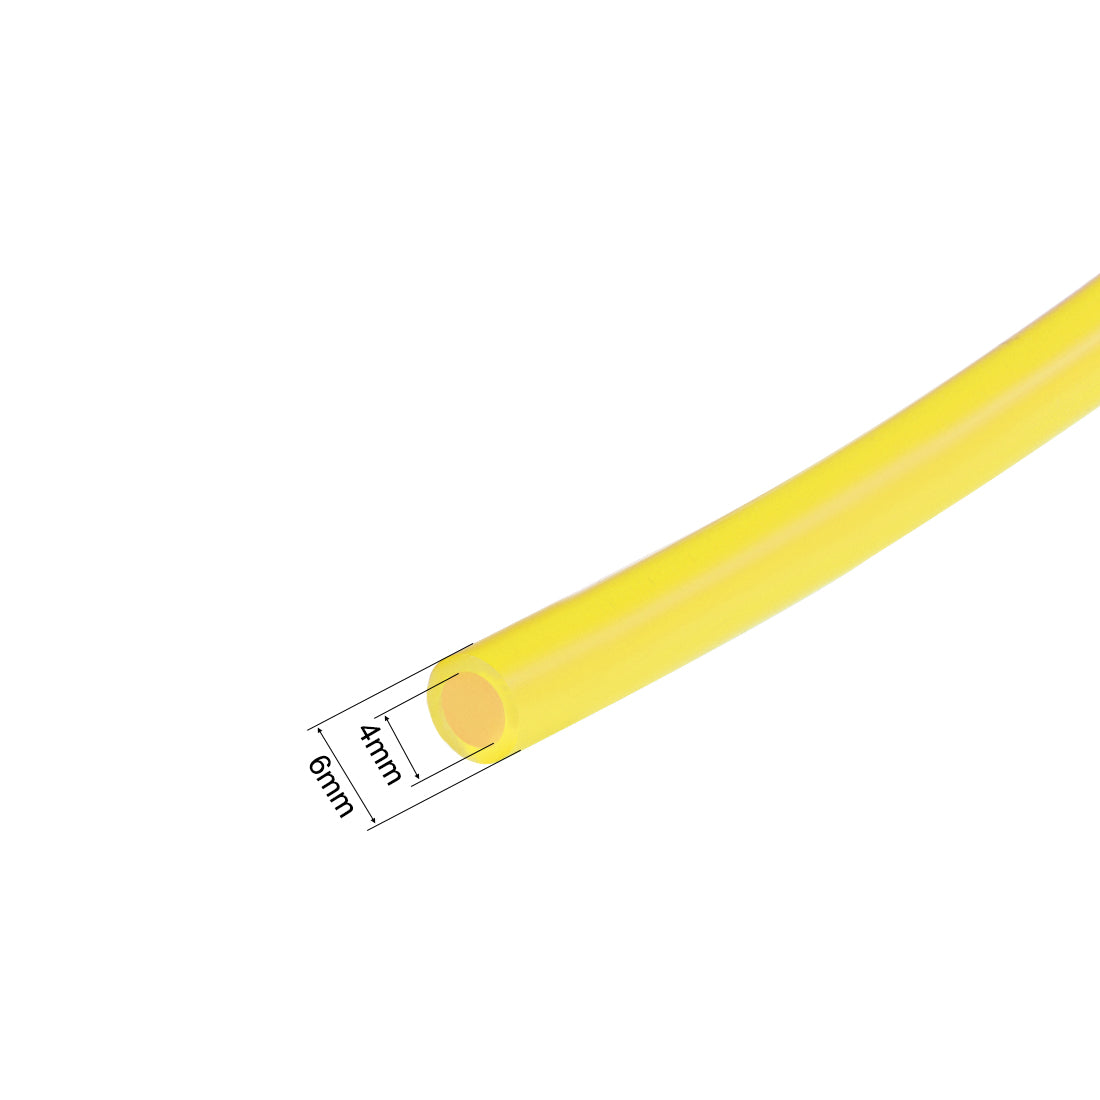 uxcell Uxcell Silicone Tube, 4mm ID x 6mm OD 1m/3.3ft Tubing Yellow